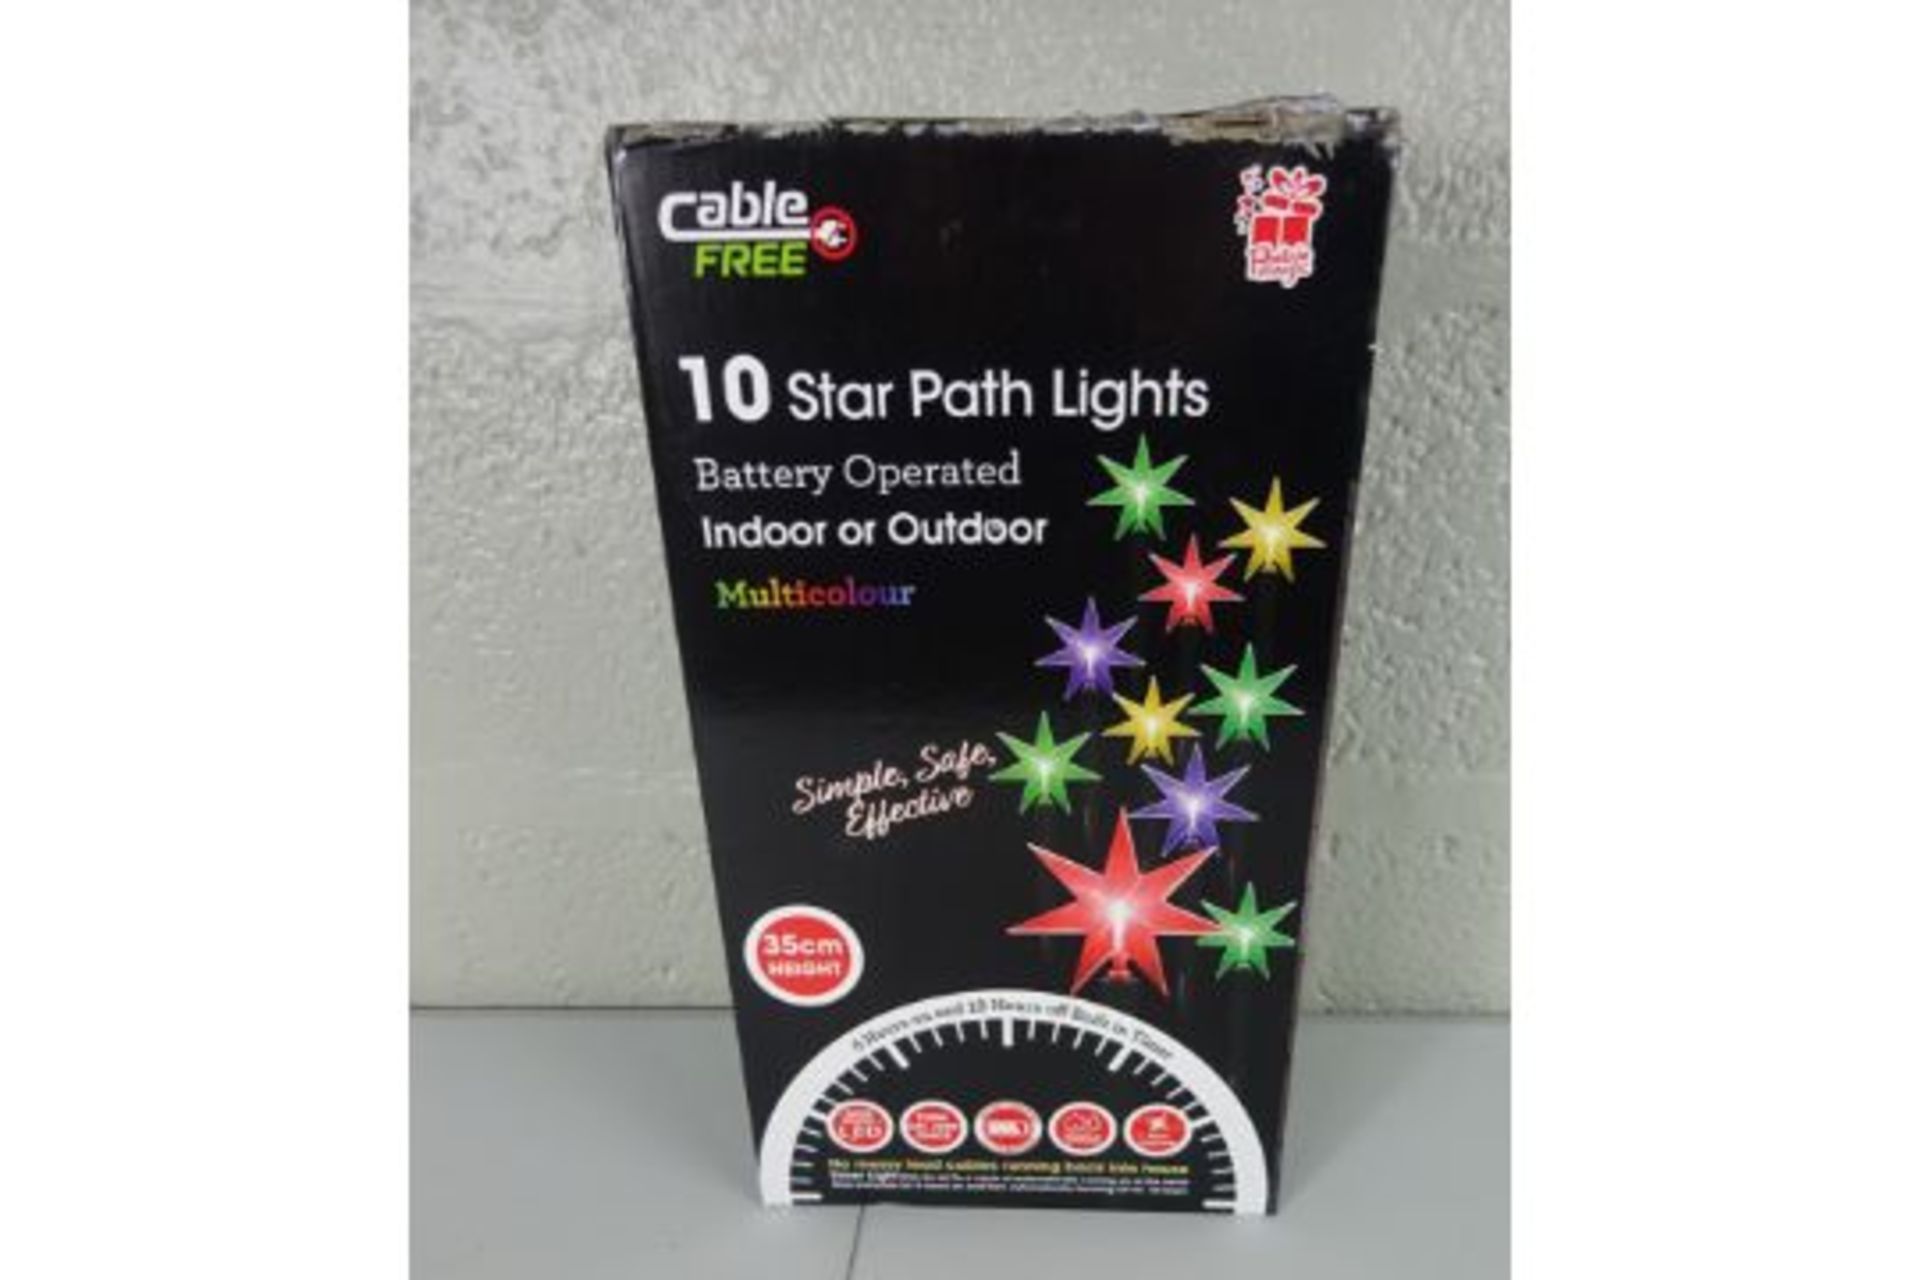 10. INDOOR OR OUTDOOR MULTICOLOUR STAR PATH LIGHTS